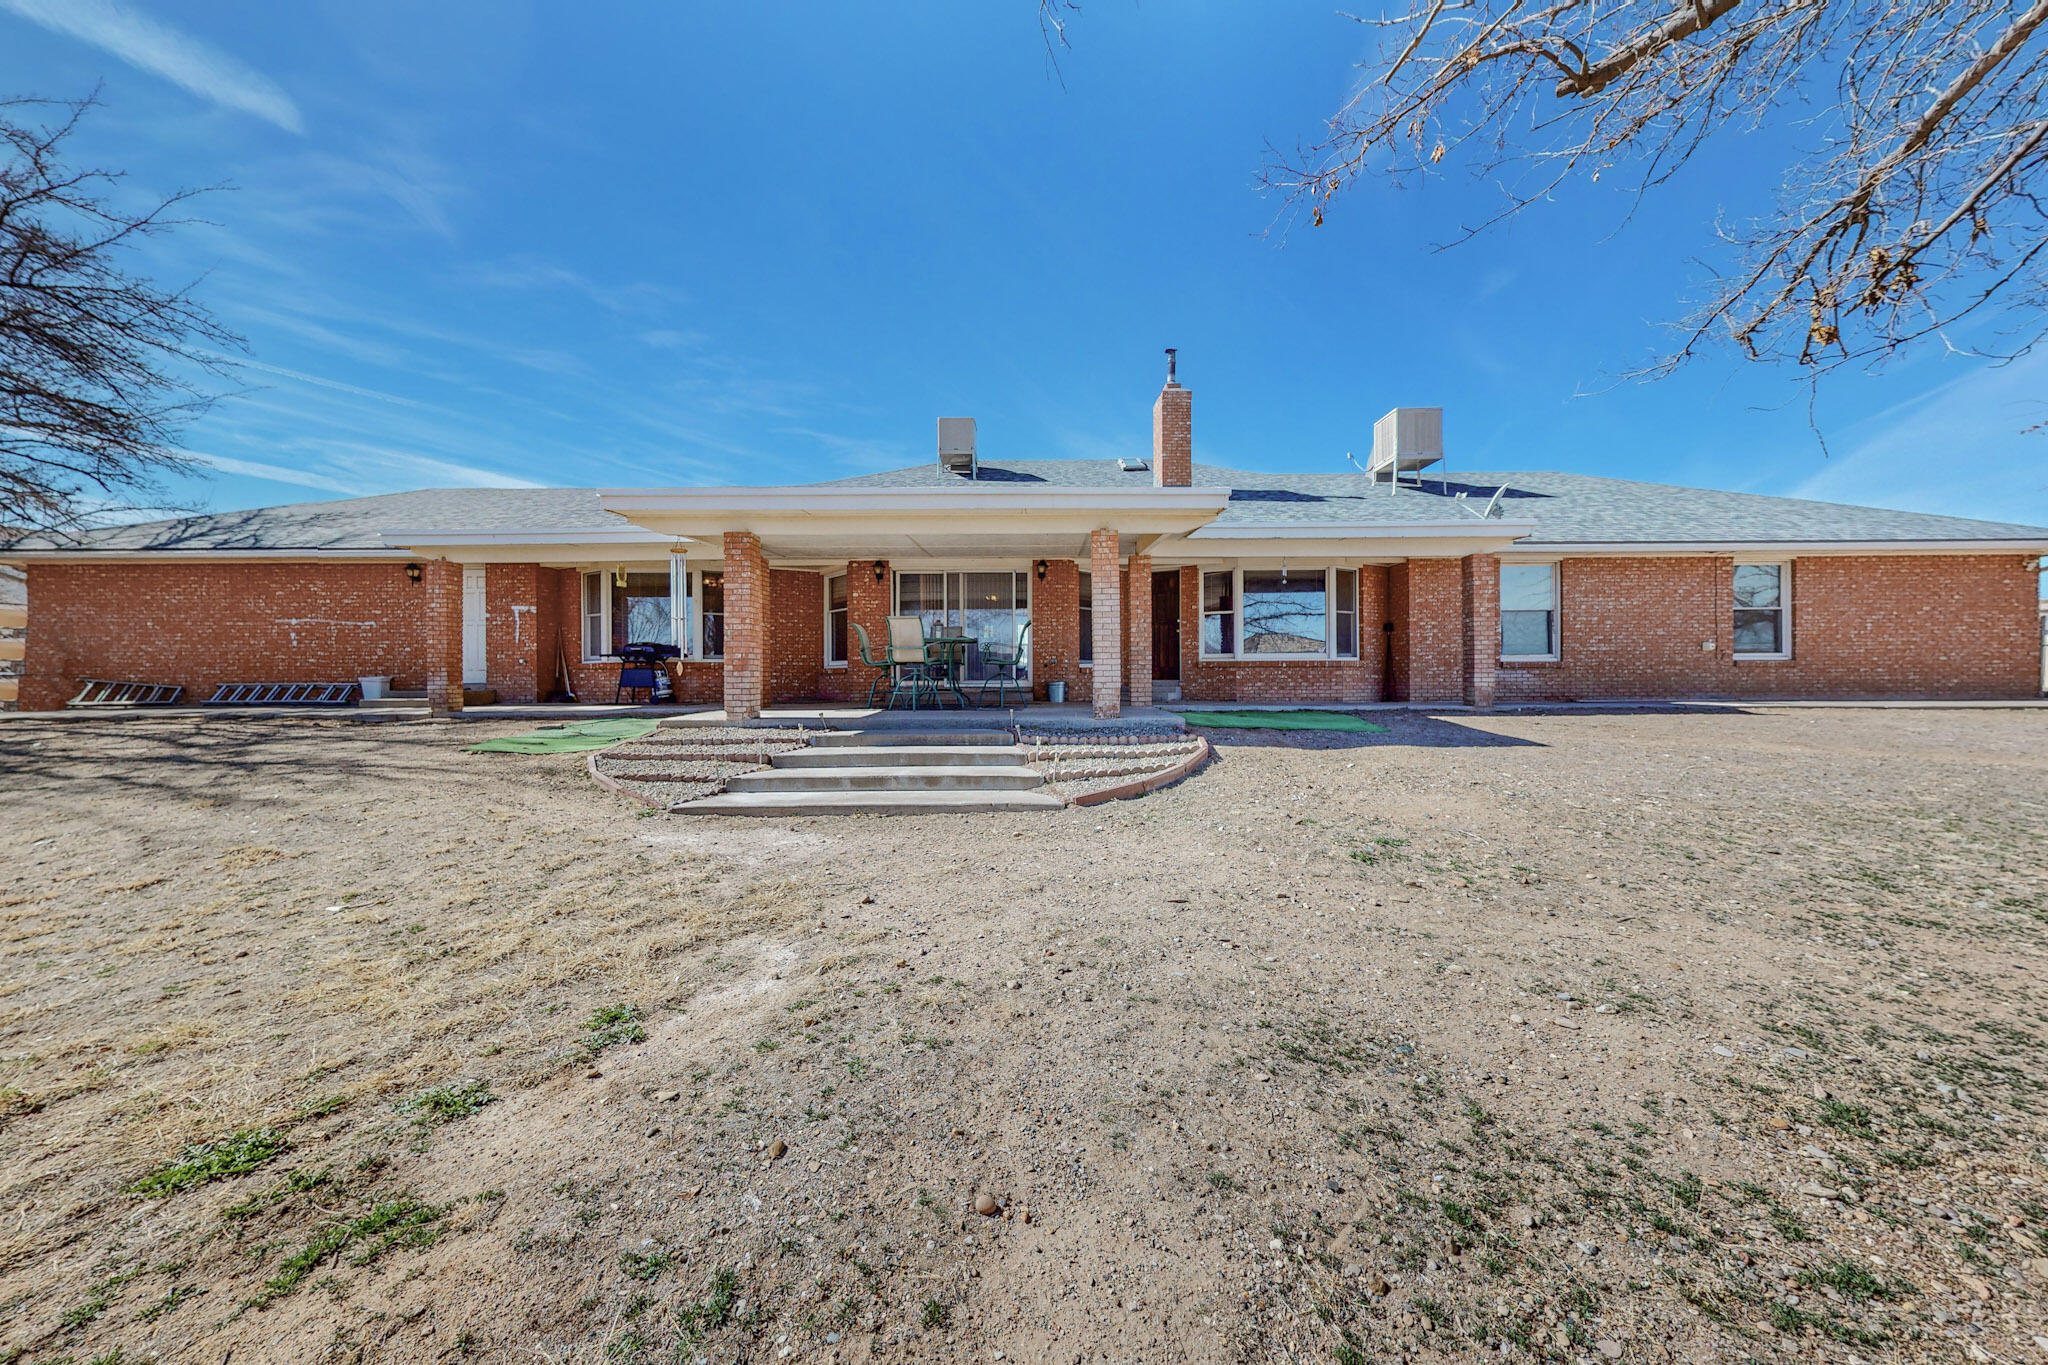 502 Ladera Drive, Belen, New Mexico 87002, 4 Bedrooms Bedrooms, ,3 BathroomsBathrooms,Residential,For Sale,502 Ladera Drive,1049900